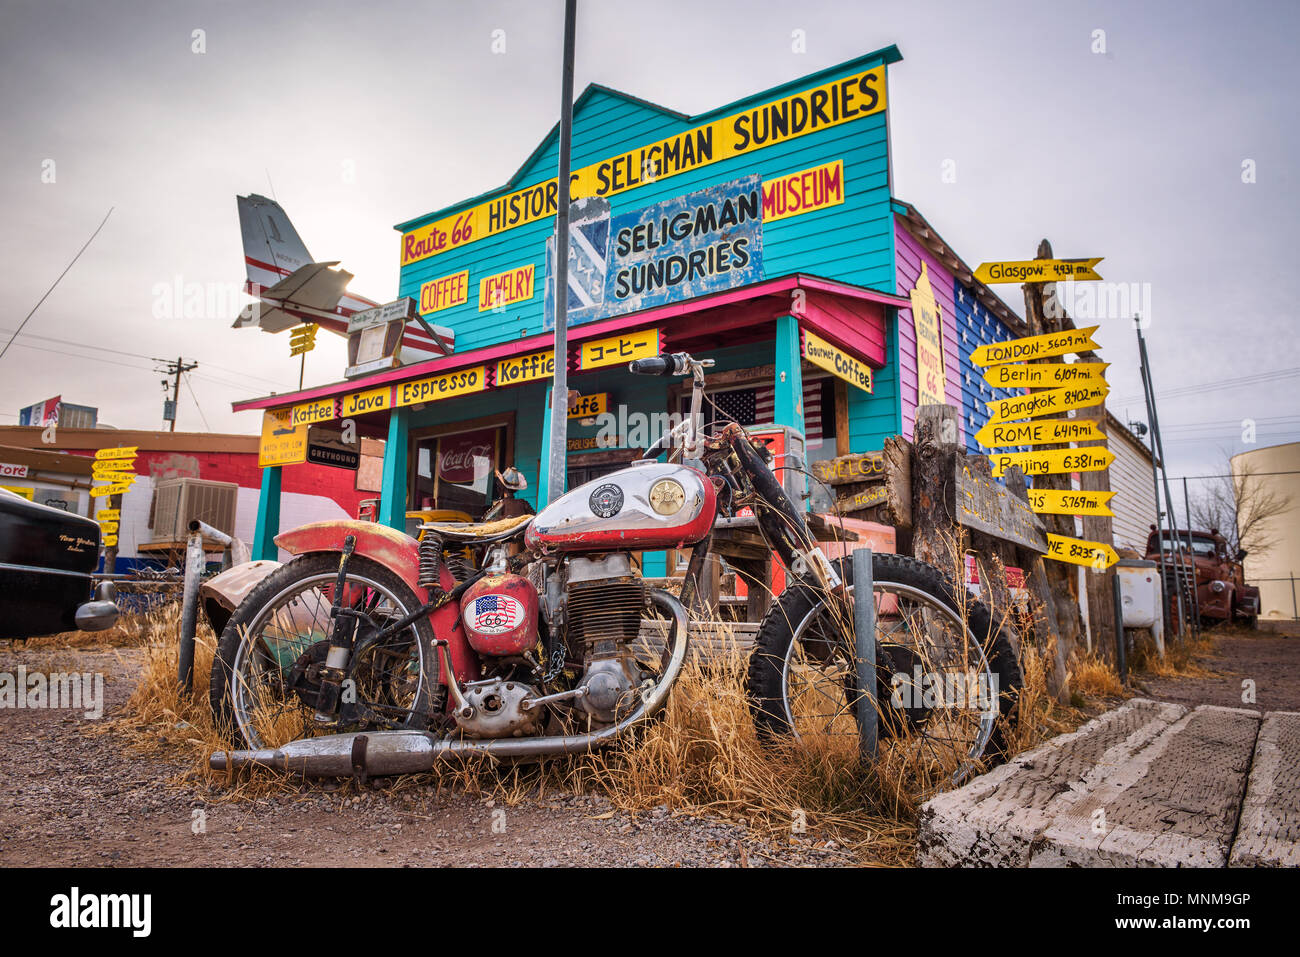 Old motorbike left abandoned at a souvenir shop on route 66 in Arizona Stock Photo